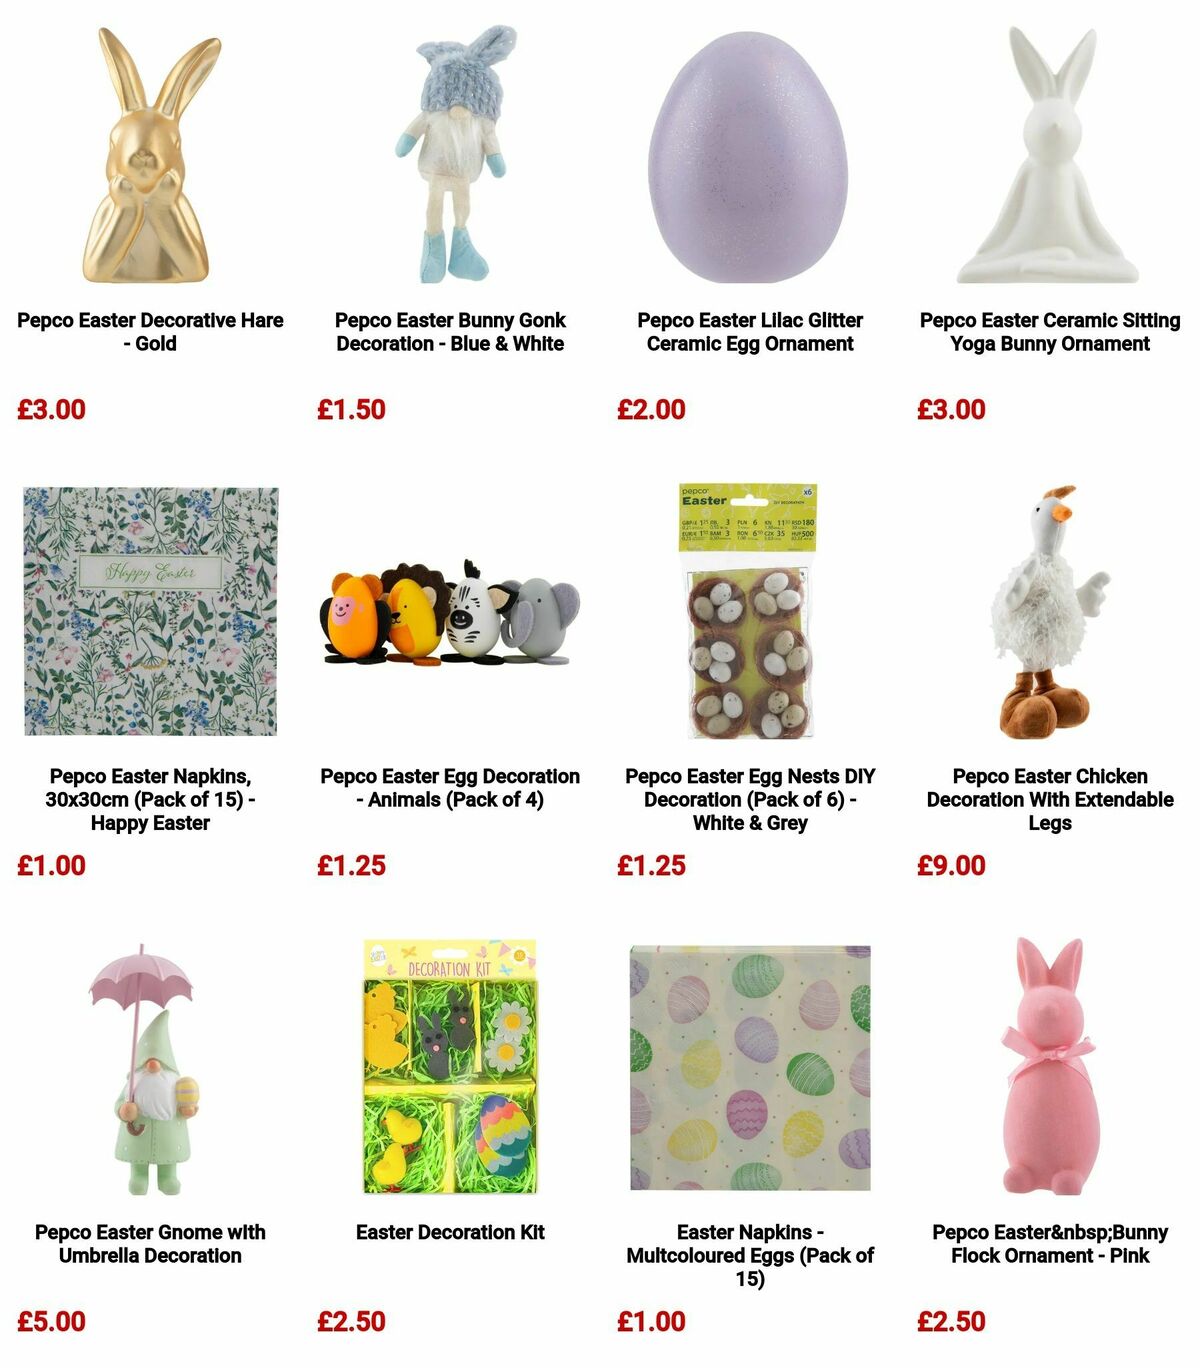 Poundland Easter Offers from 5 March